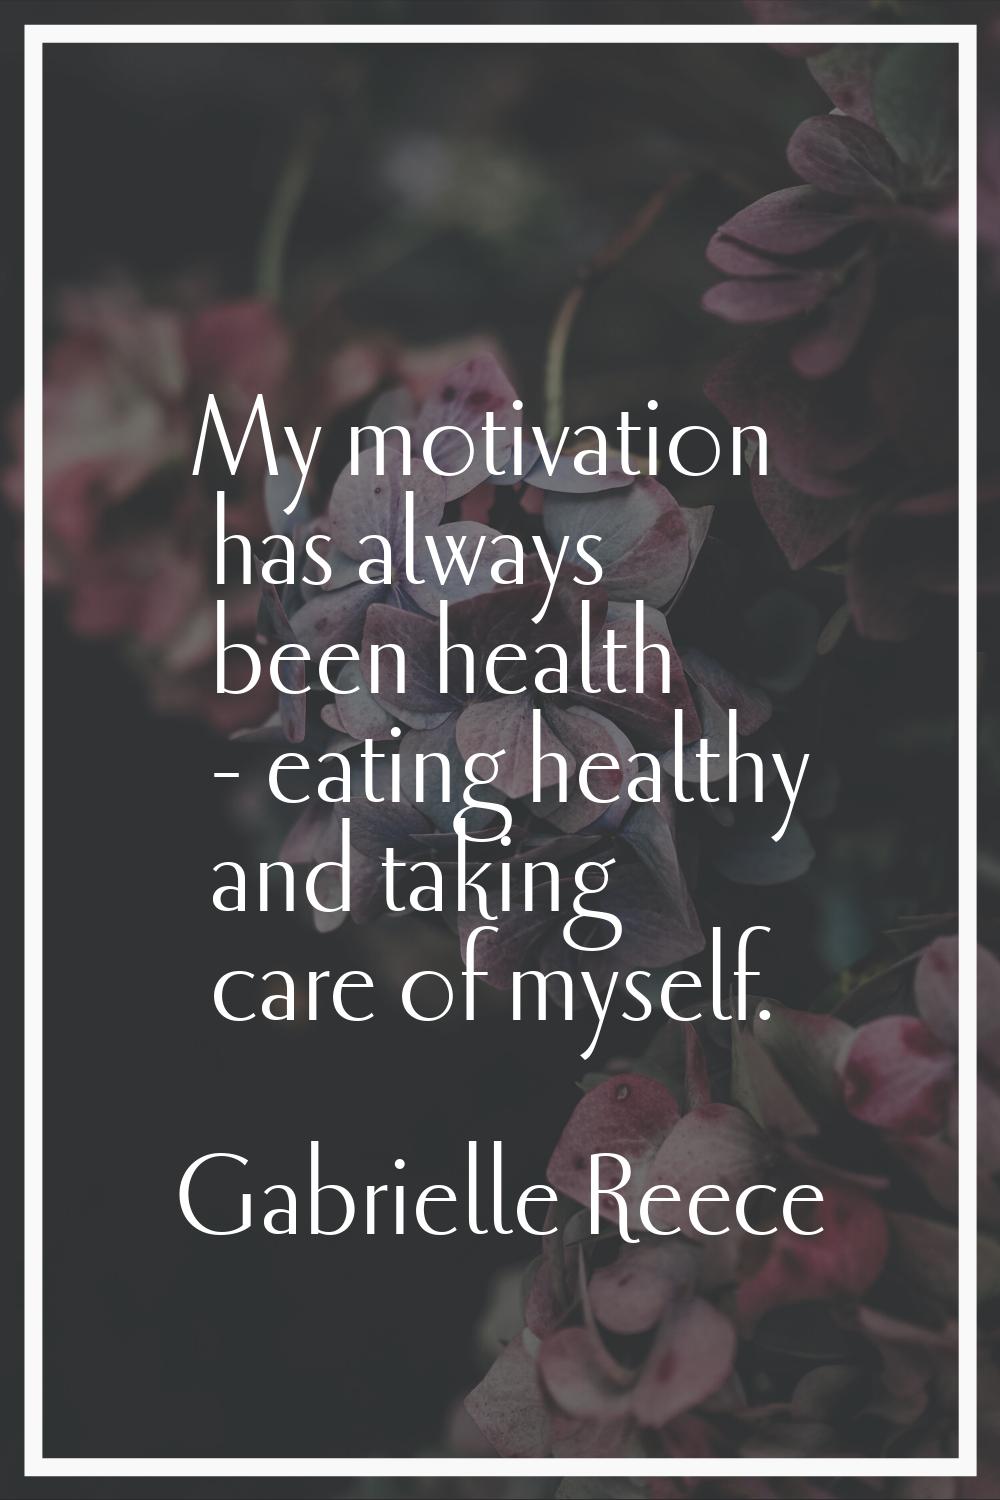 My motivation has always been health - eating healthy and taking care of myself.